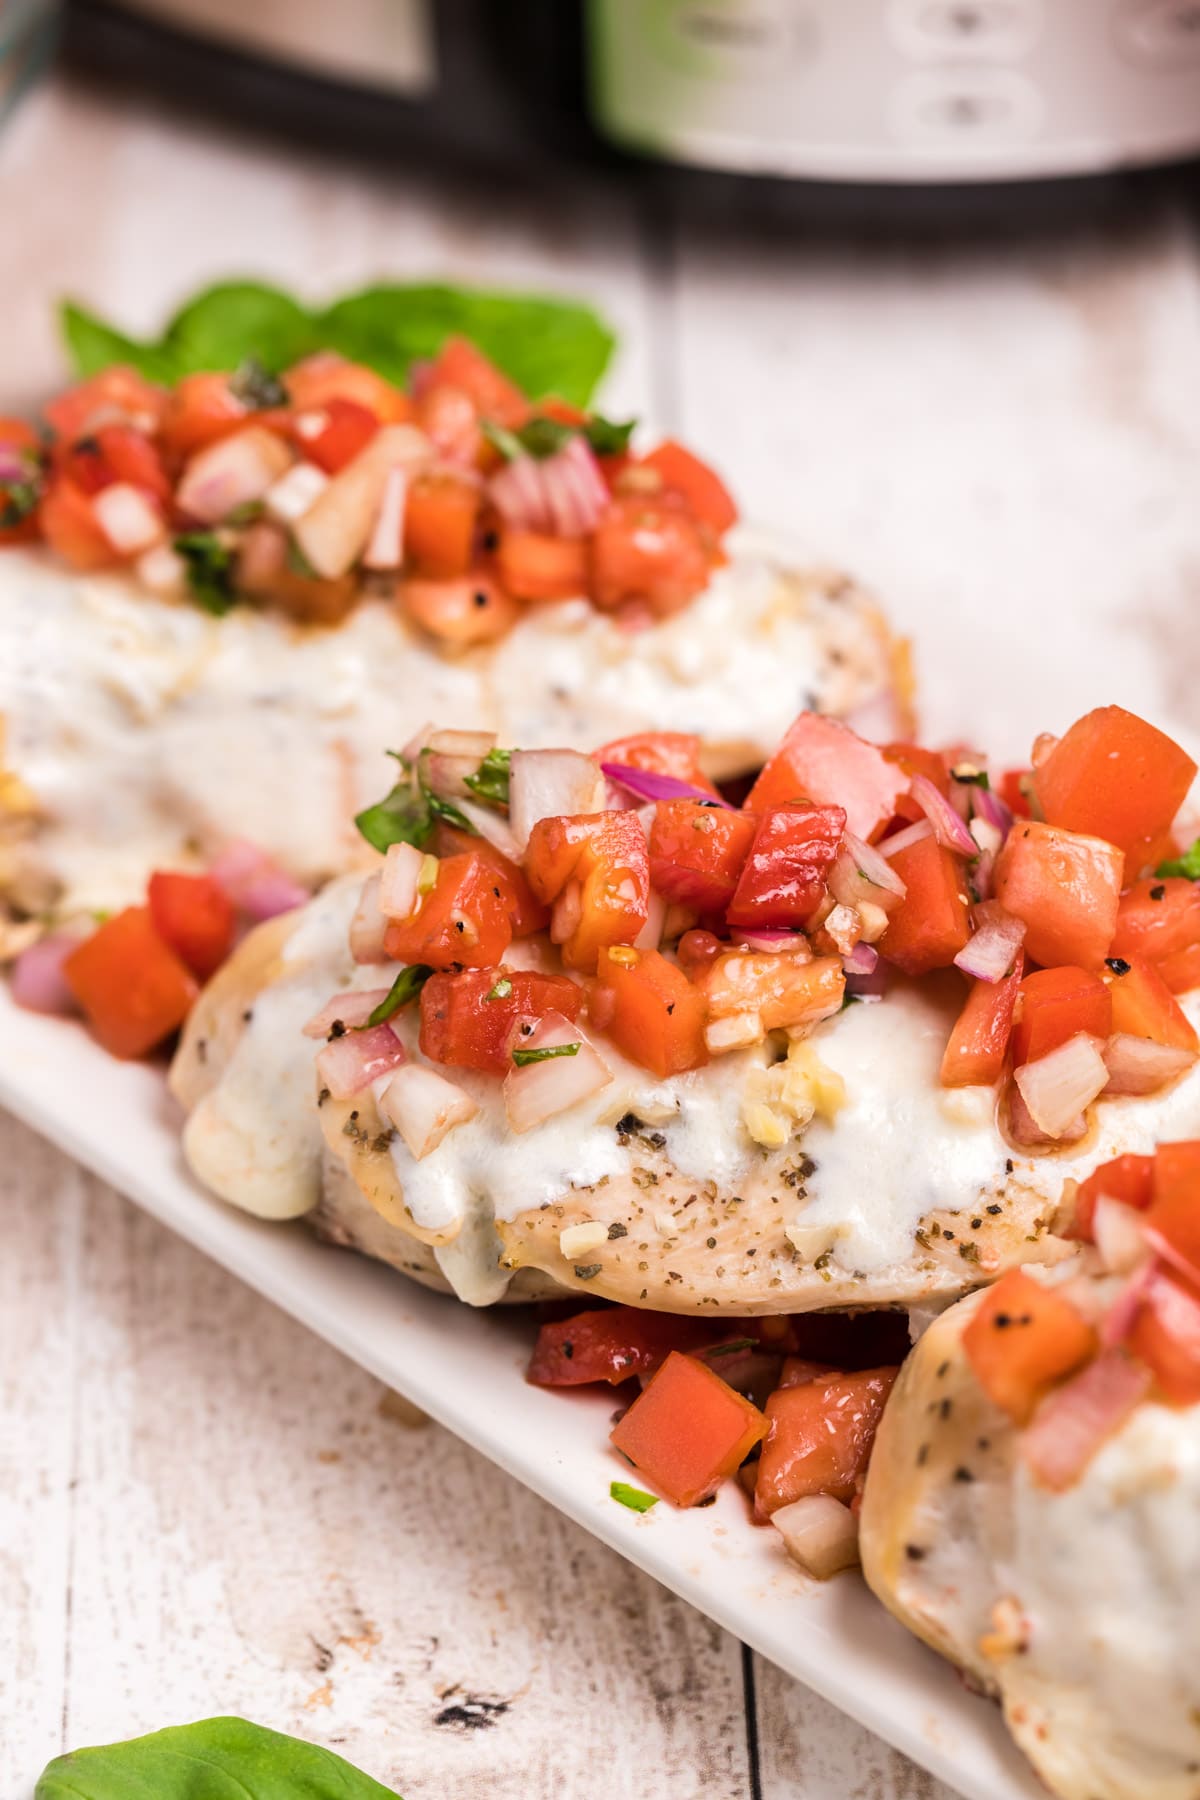 3 chicken breasts on a plate with bruschetta tomato topping and cheese